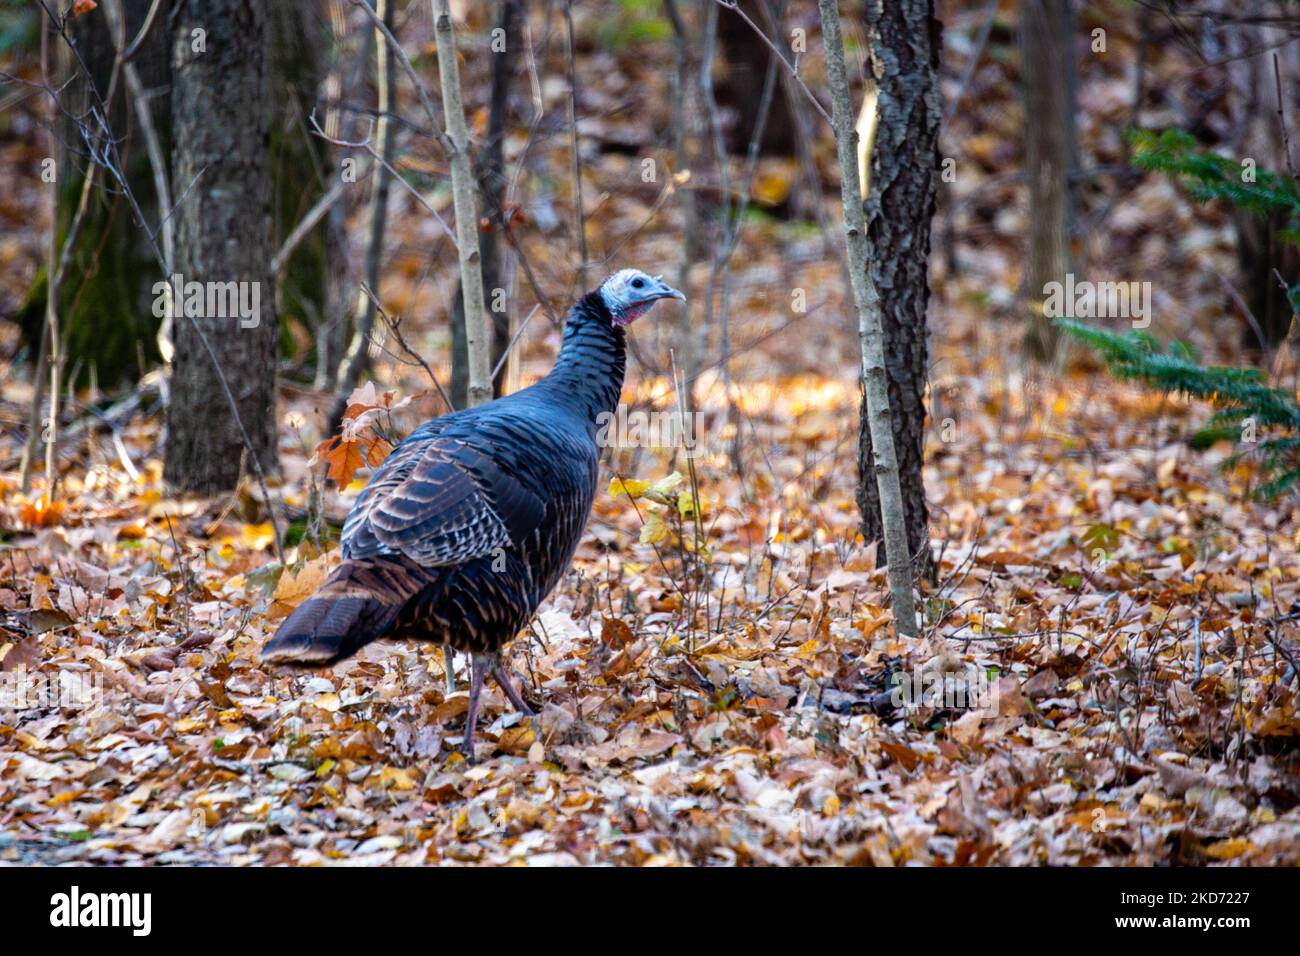 Close-up of a wild turkey (Meleagris gallopavo) in a Wisconsin forest, horizontal Stock Photo